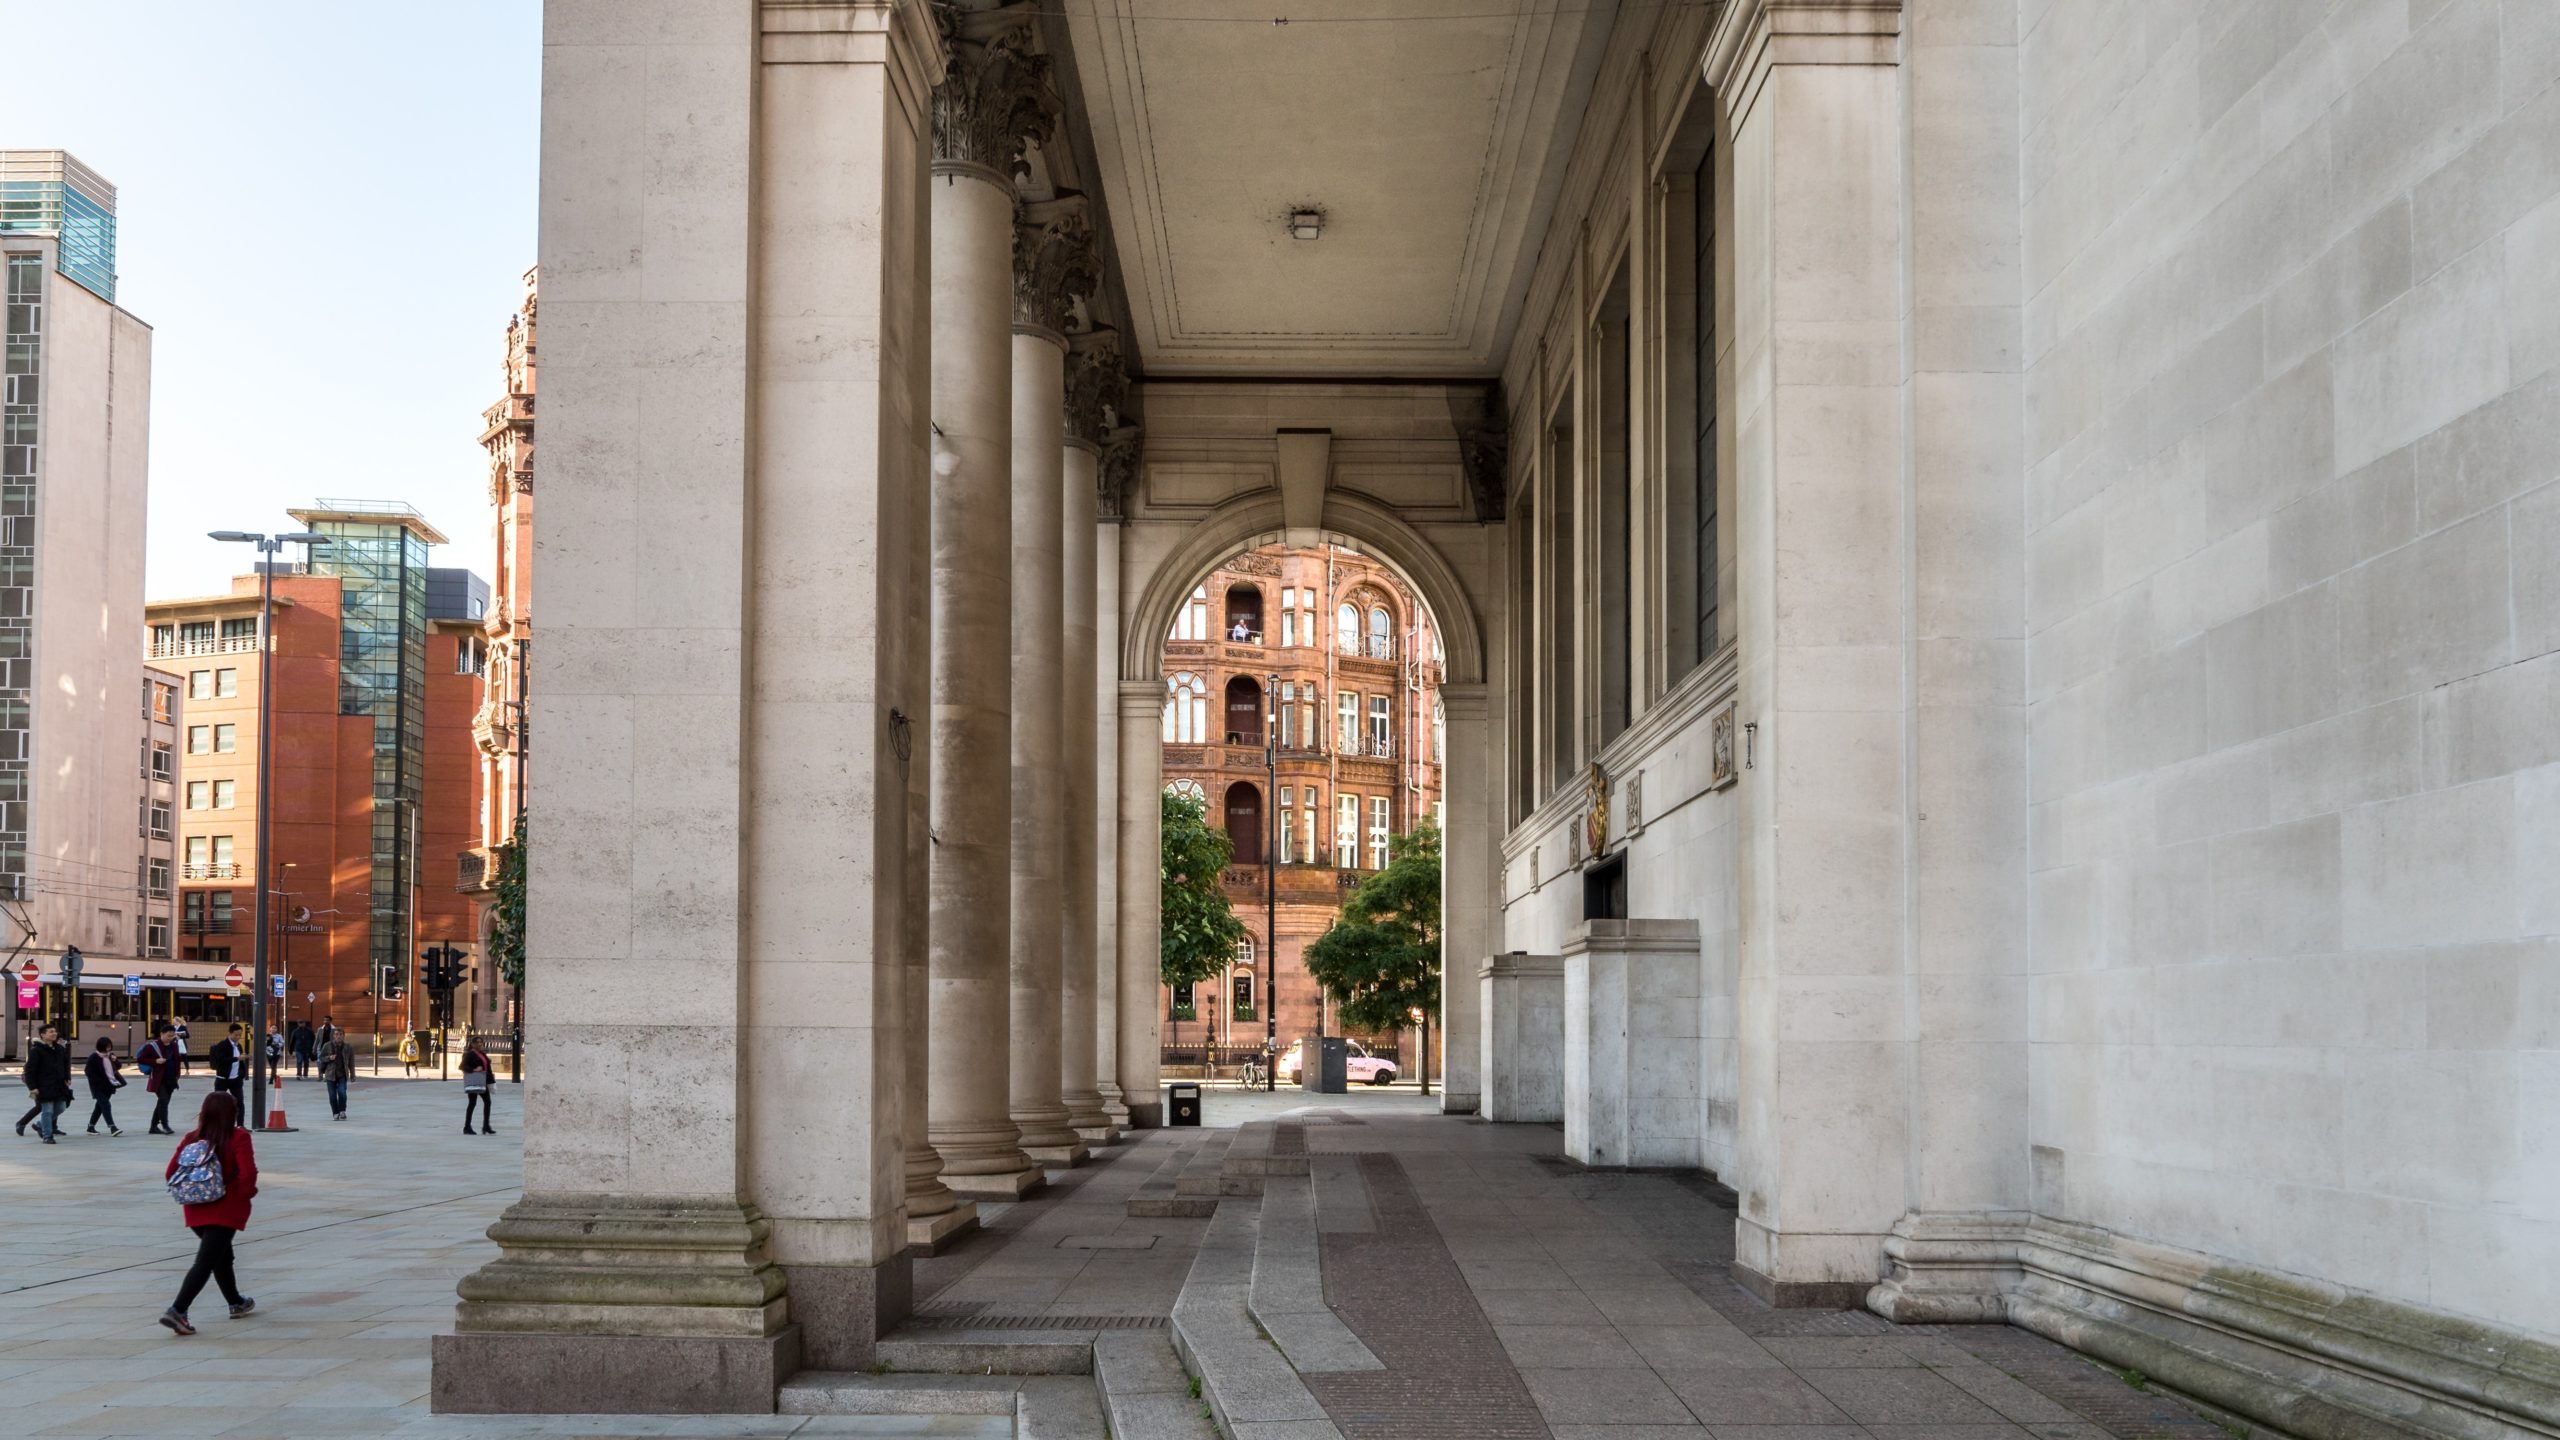 Looking through the portico of Central Library